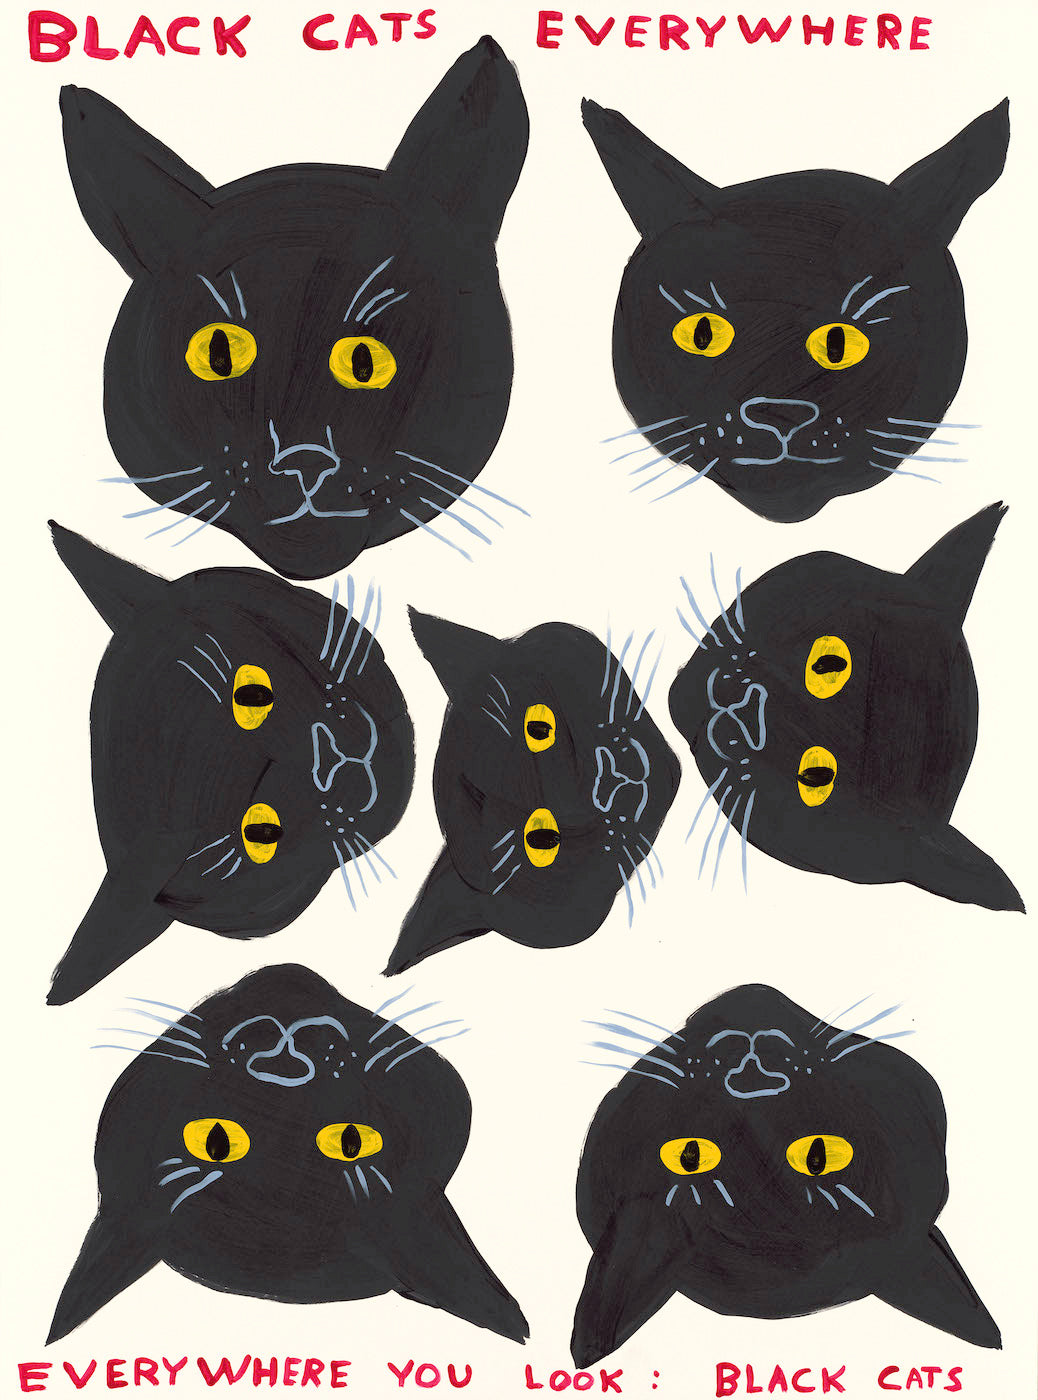 Black Cats, 2021 by David Shrigley is a limited edition, 12 colour screenprint with a varnish overlay. Discover the full collection of available artworks at Jealous. Purchase online or explore more prints on the gallery website.